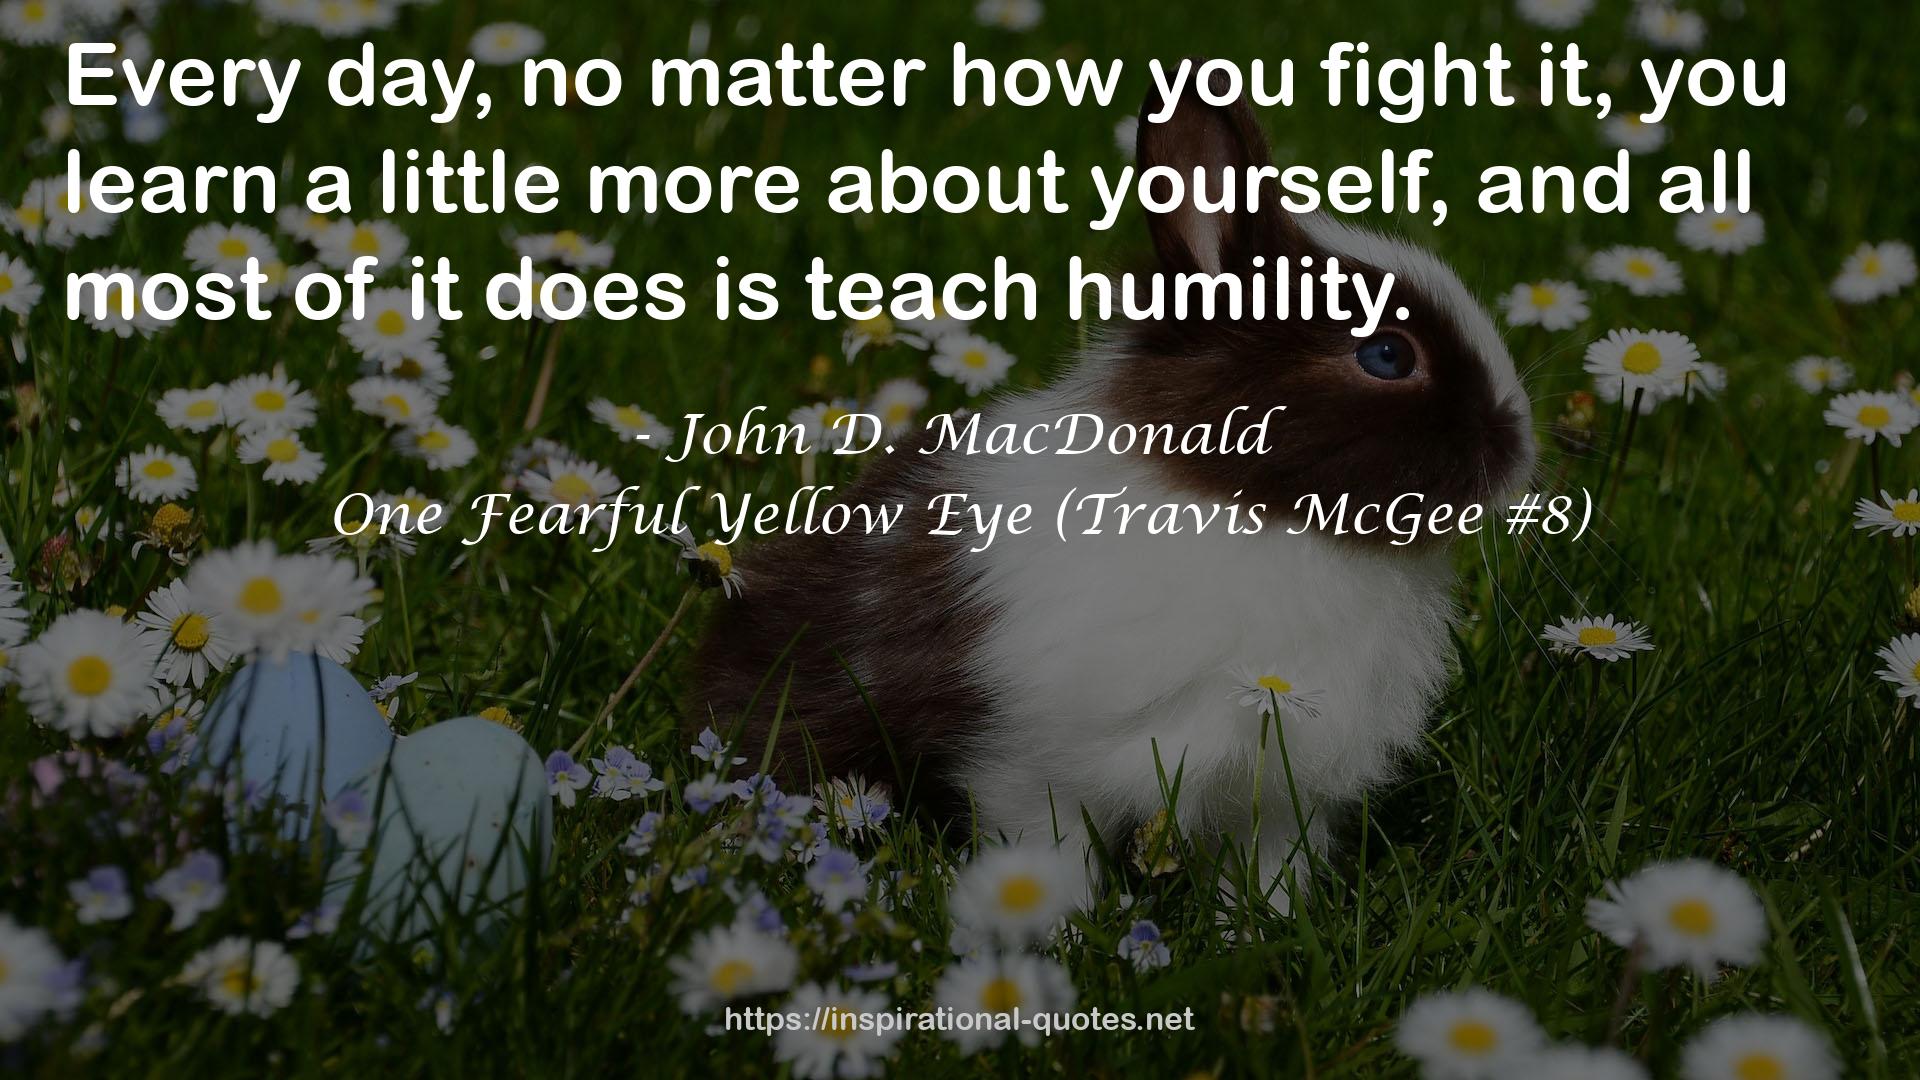 One Fearful Yellow Eye (Travis McGee #8) QUOTES